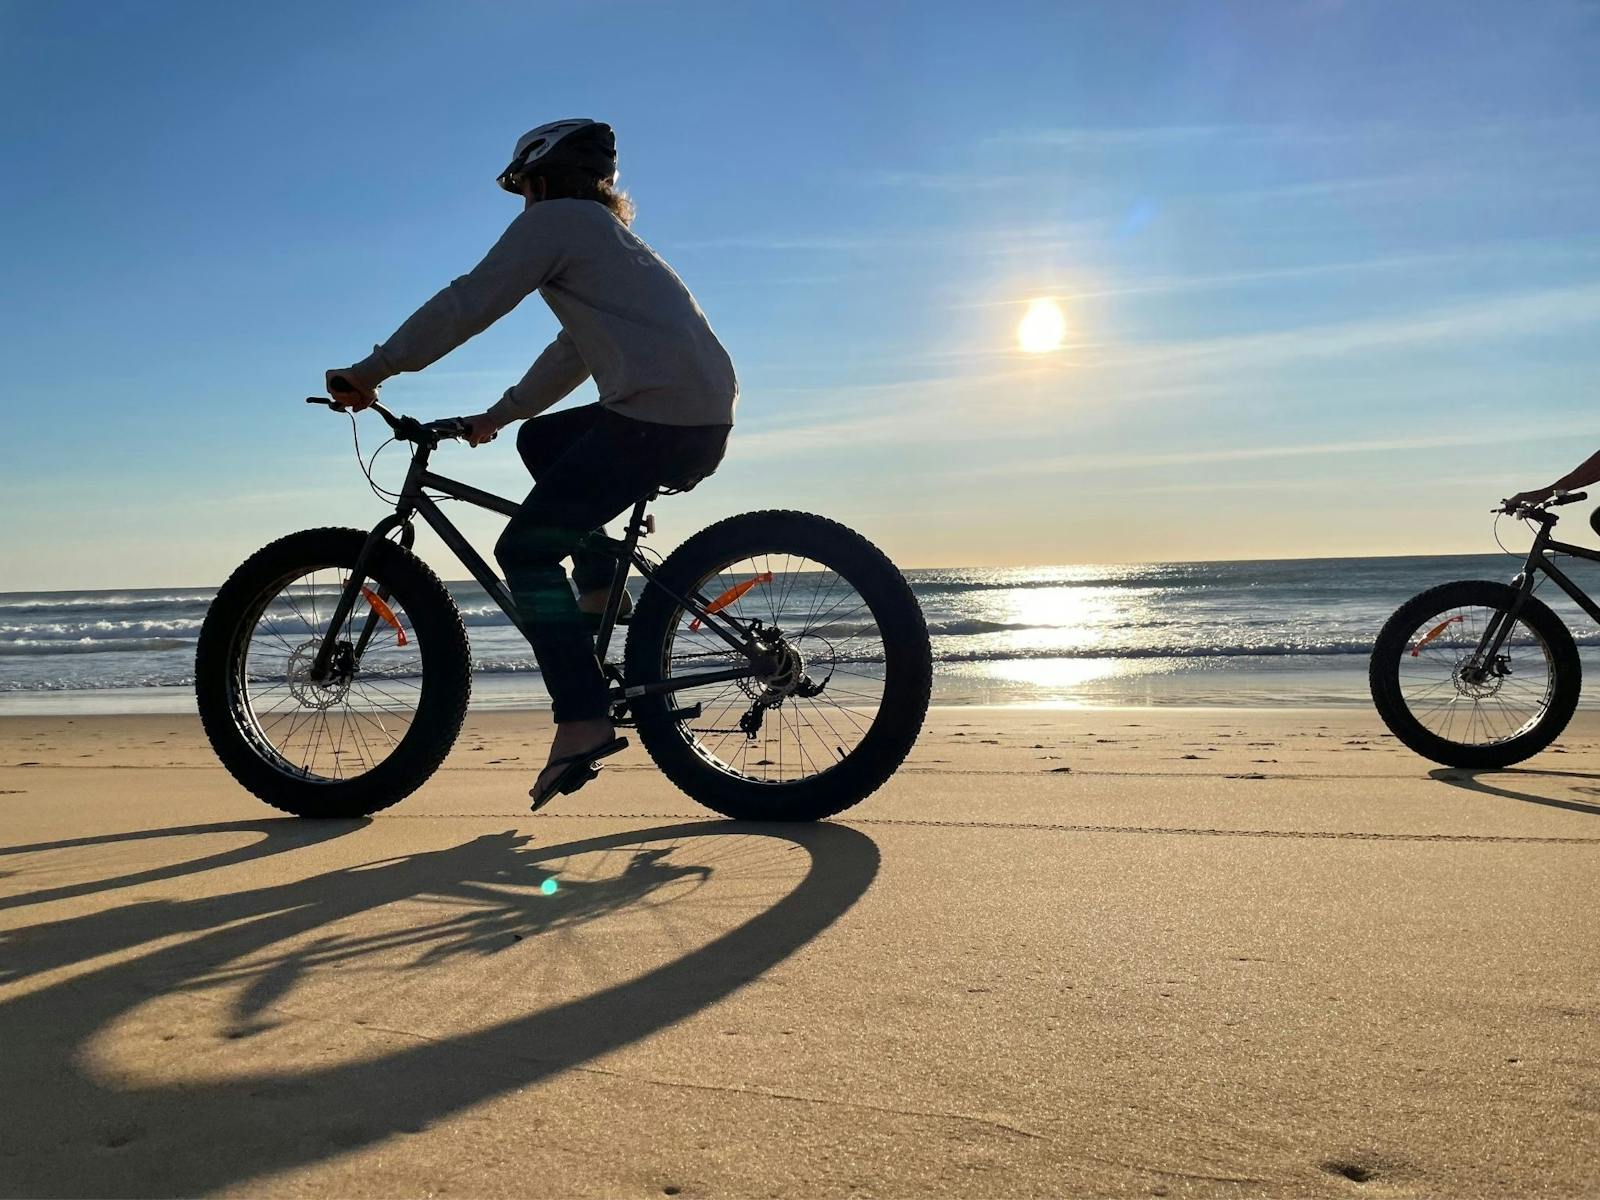 Fat-tyre bikes made for beach riding.